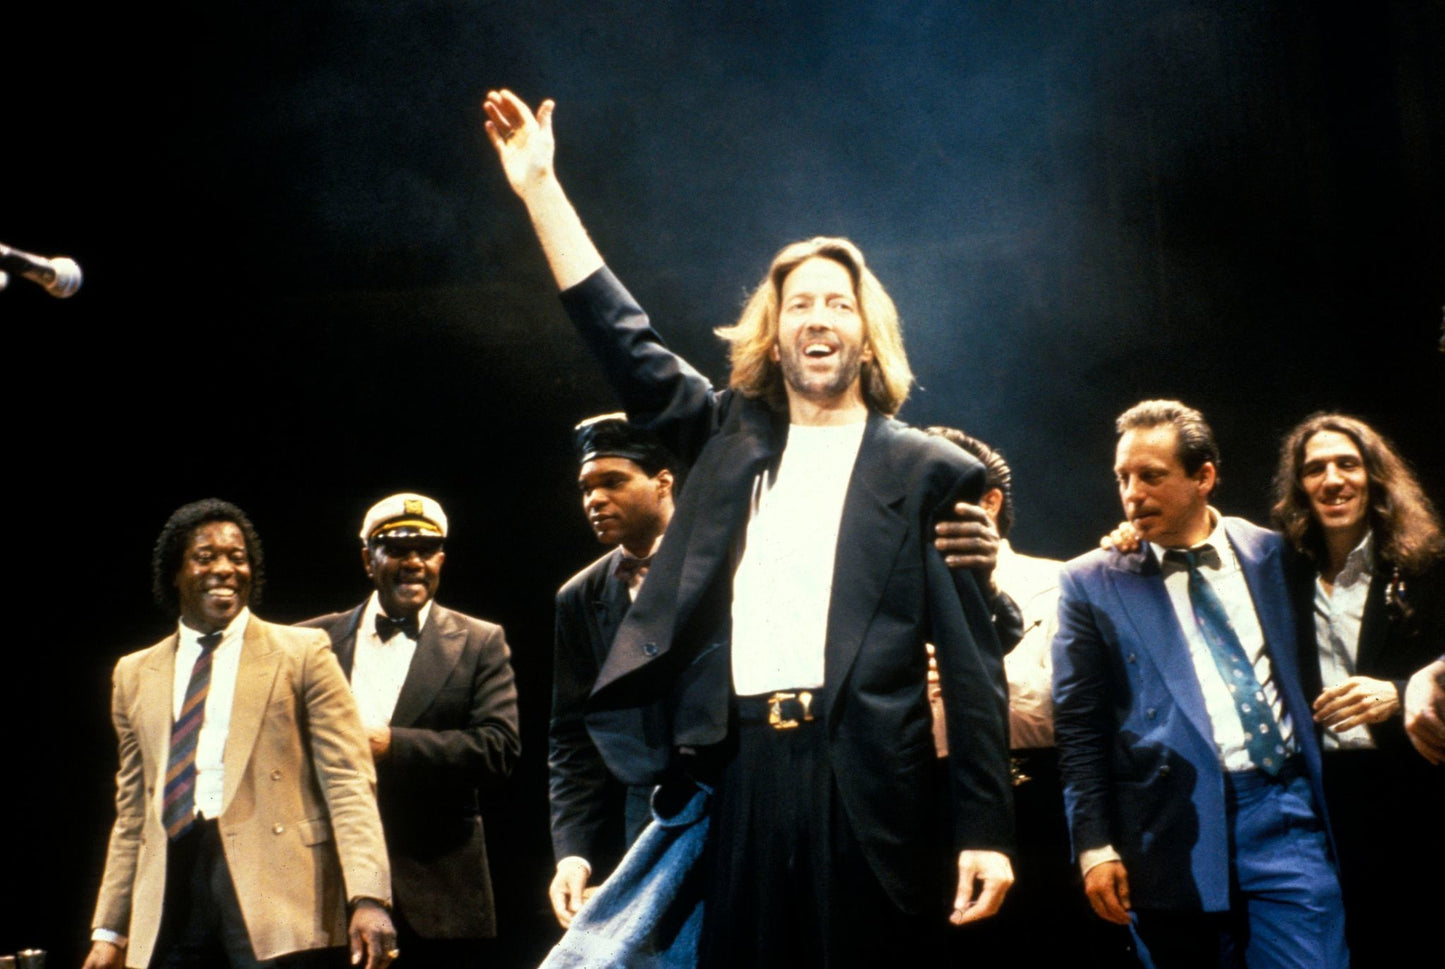 Eric Clapton - Cheering the Crowd at London's Royal Albert Hall, 1990 Poster 6